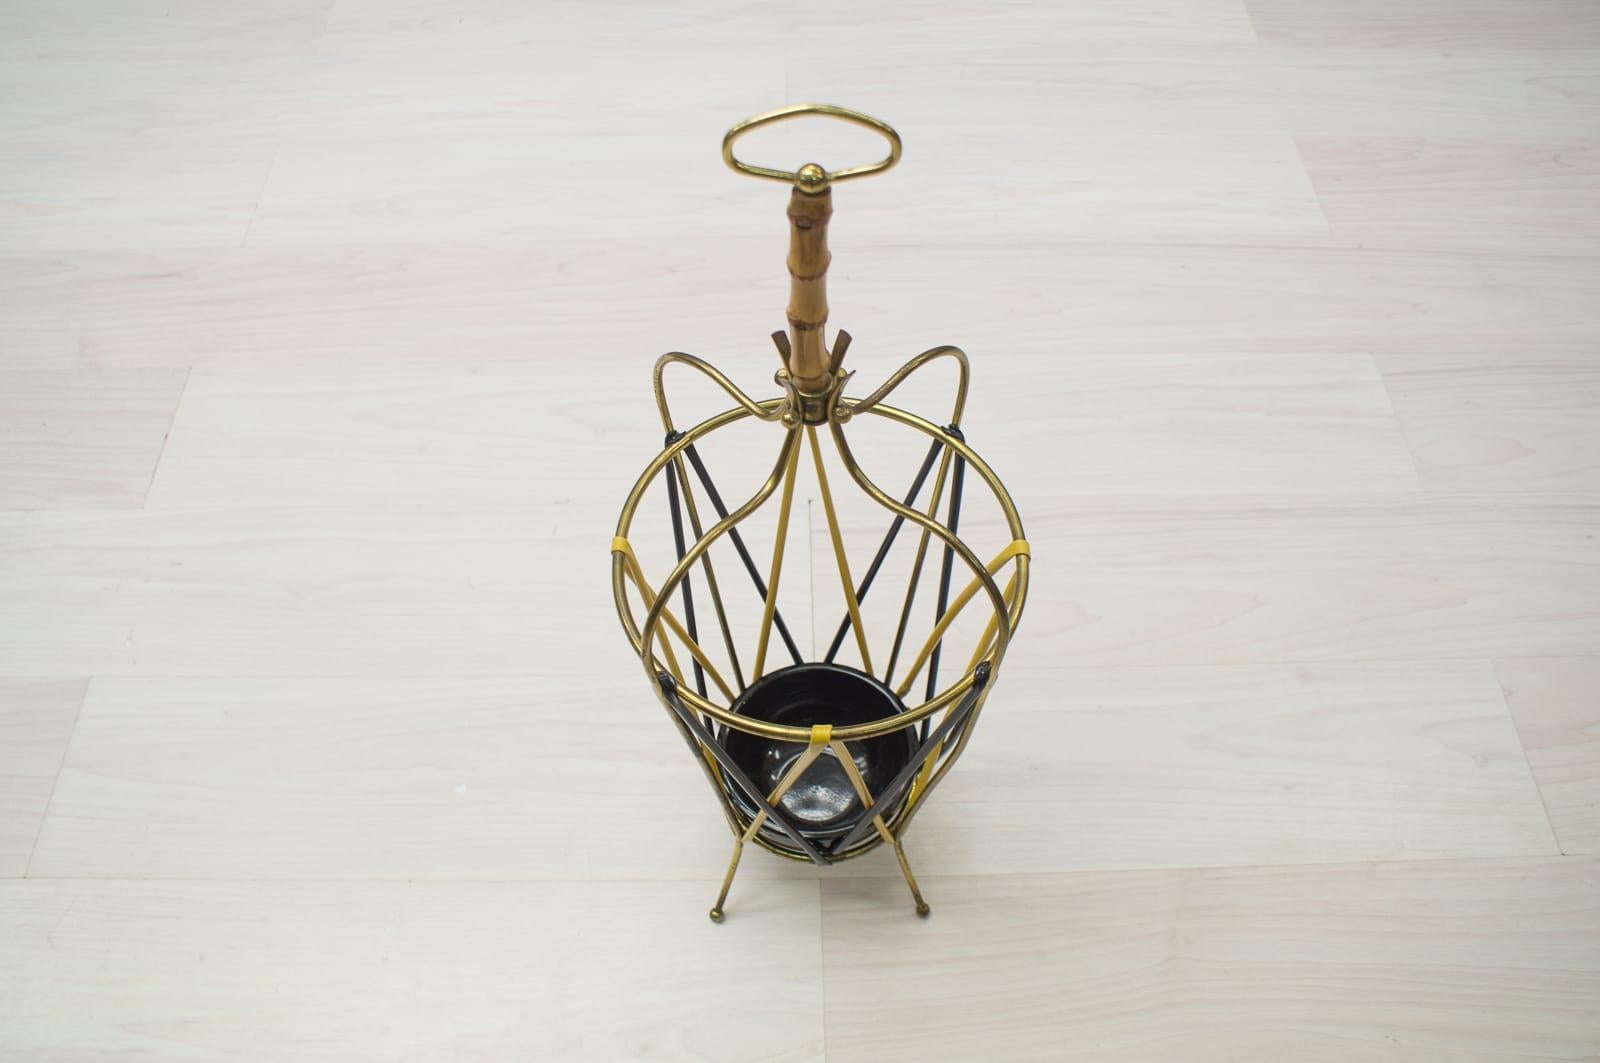 German Midcentury Bamboo and Brass Umbrella Stand, 1960s